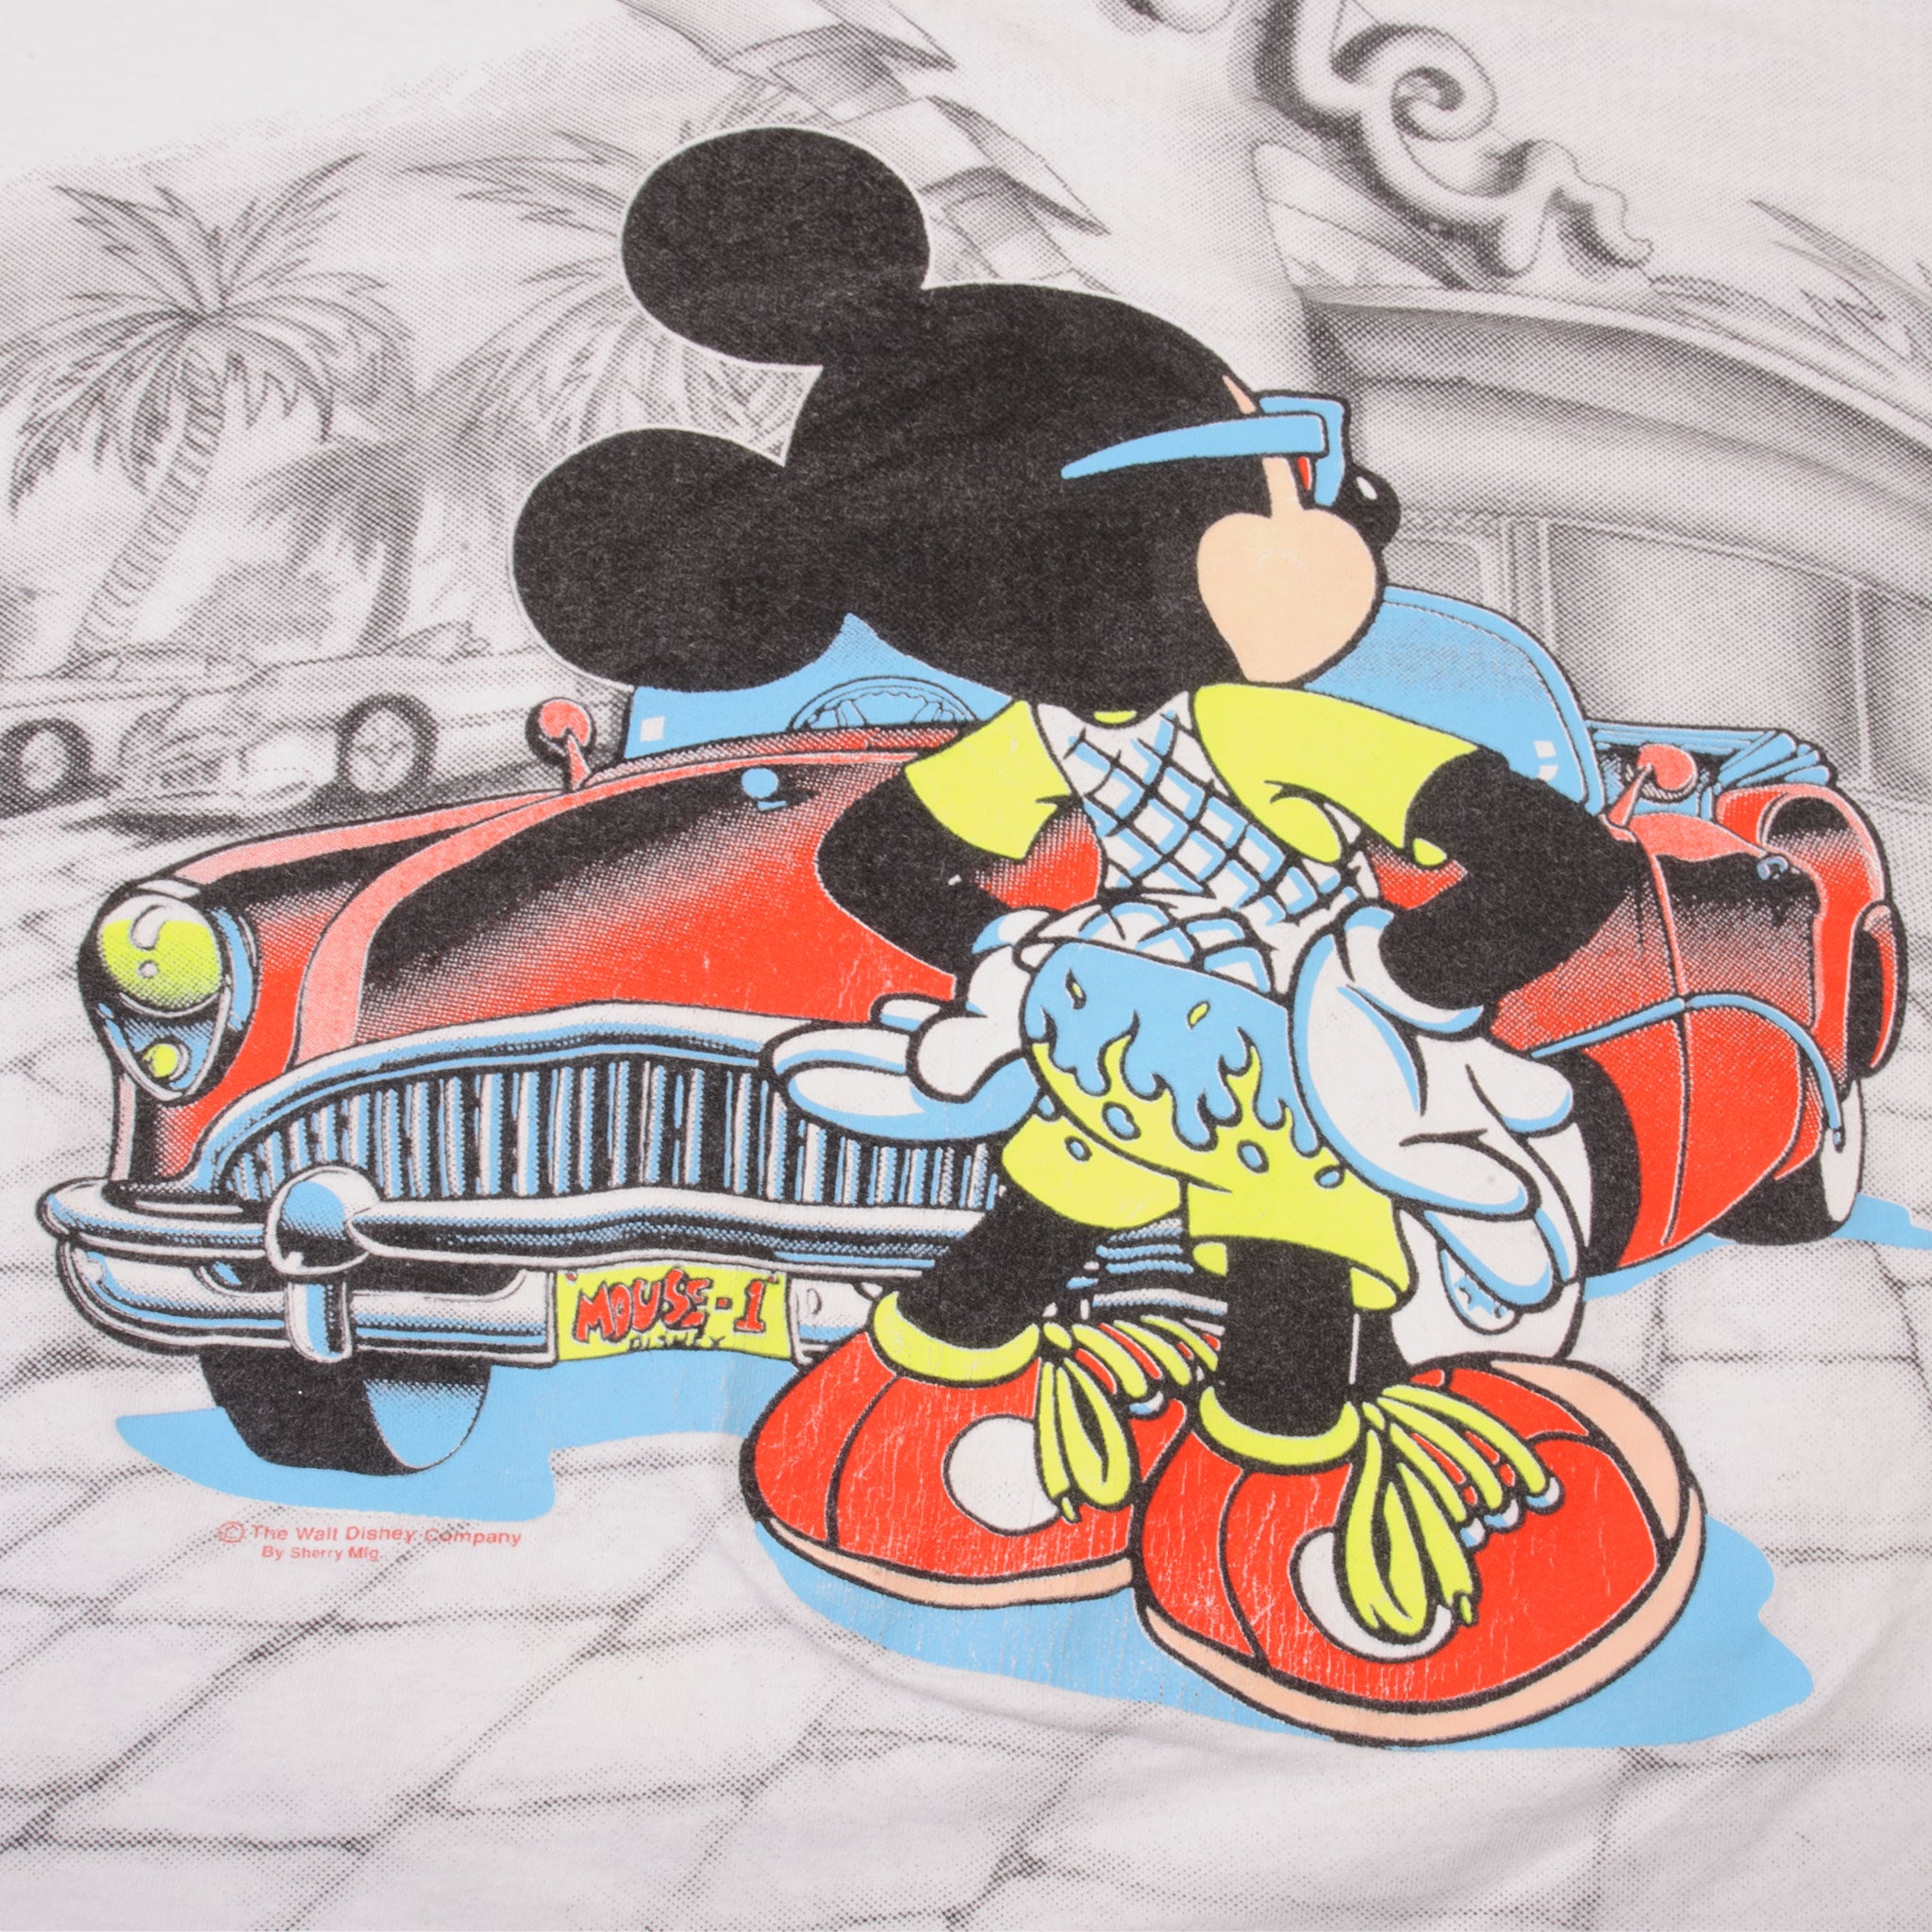 Other, Who Love Mickey Mouse Lv Tshirts Size Various Unknown If Real